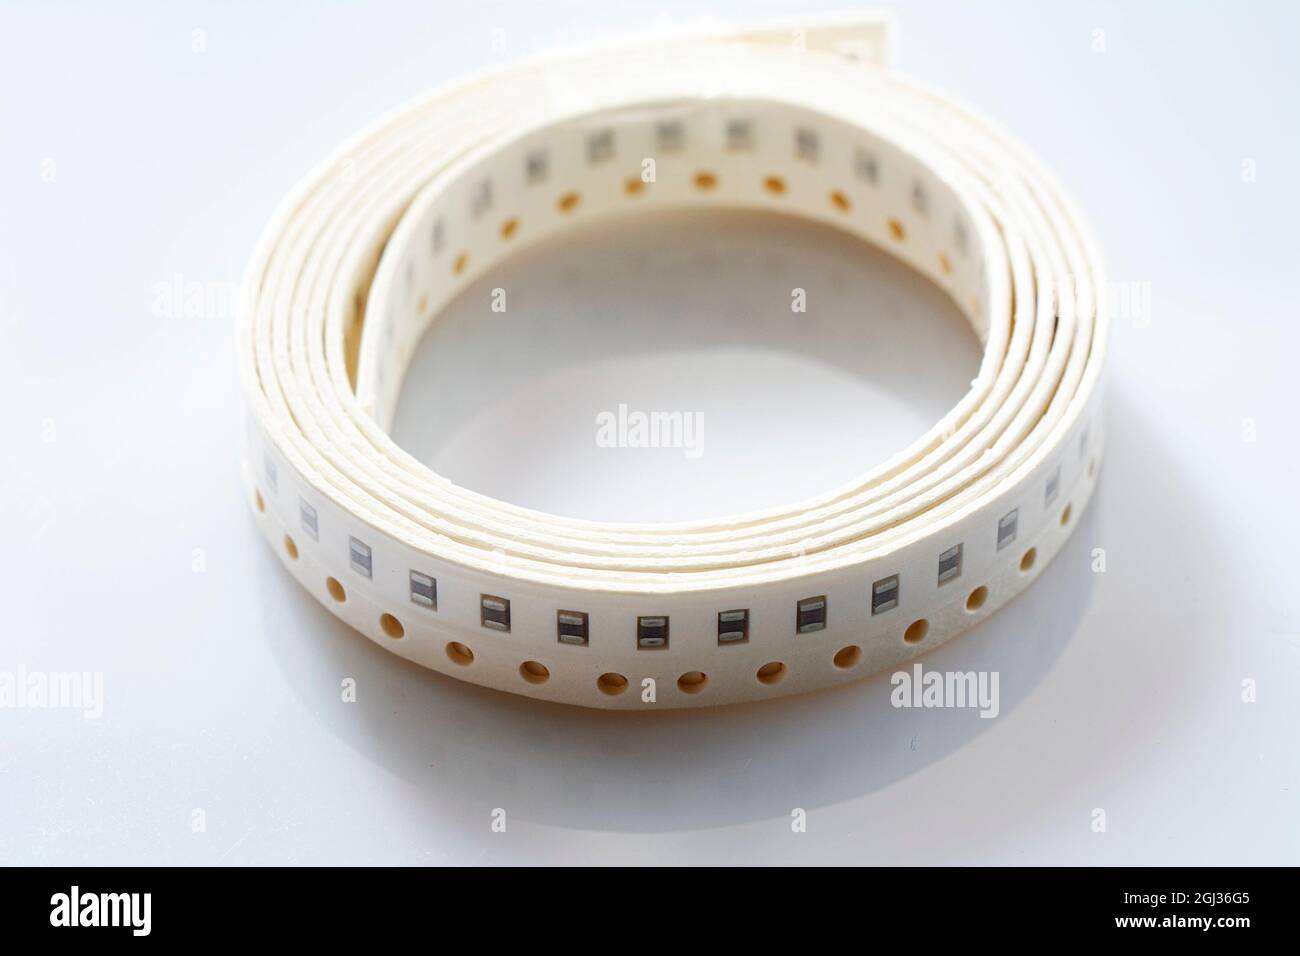 Electronic component on white background. SMD components in black plastic carrier tape with copyspace Stock Photo